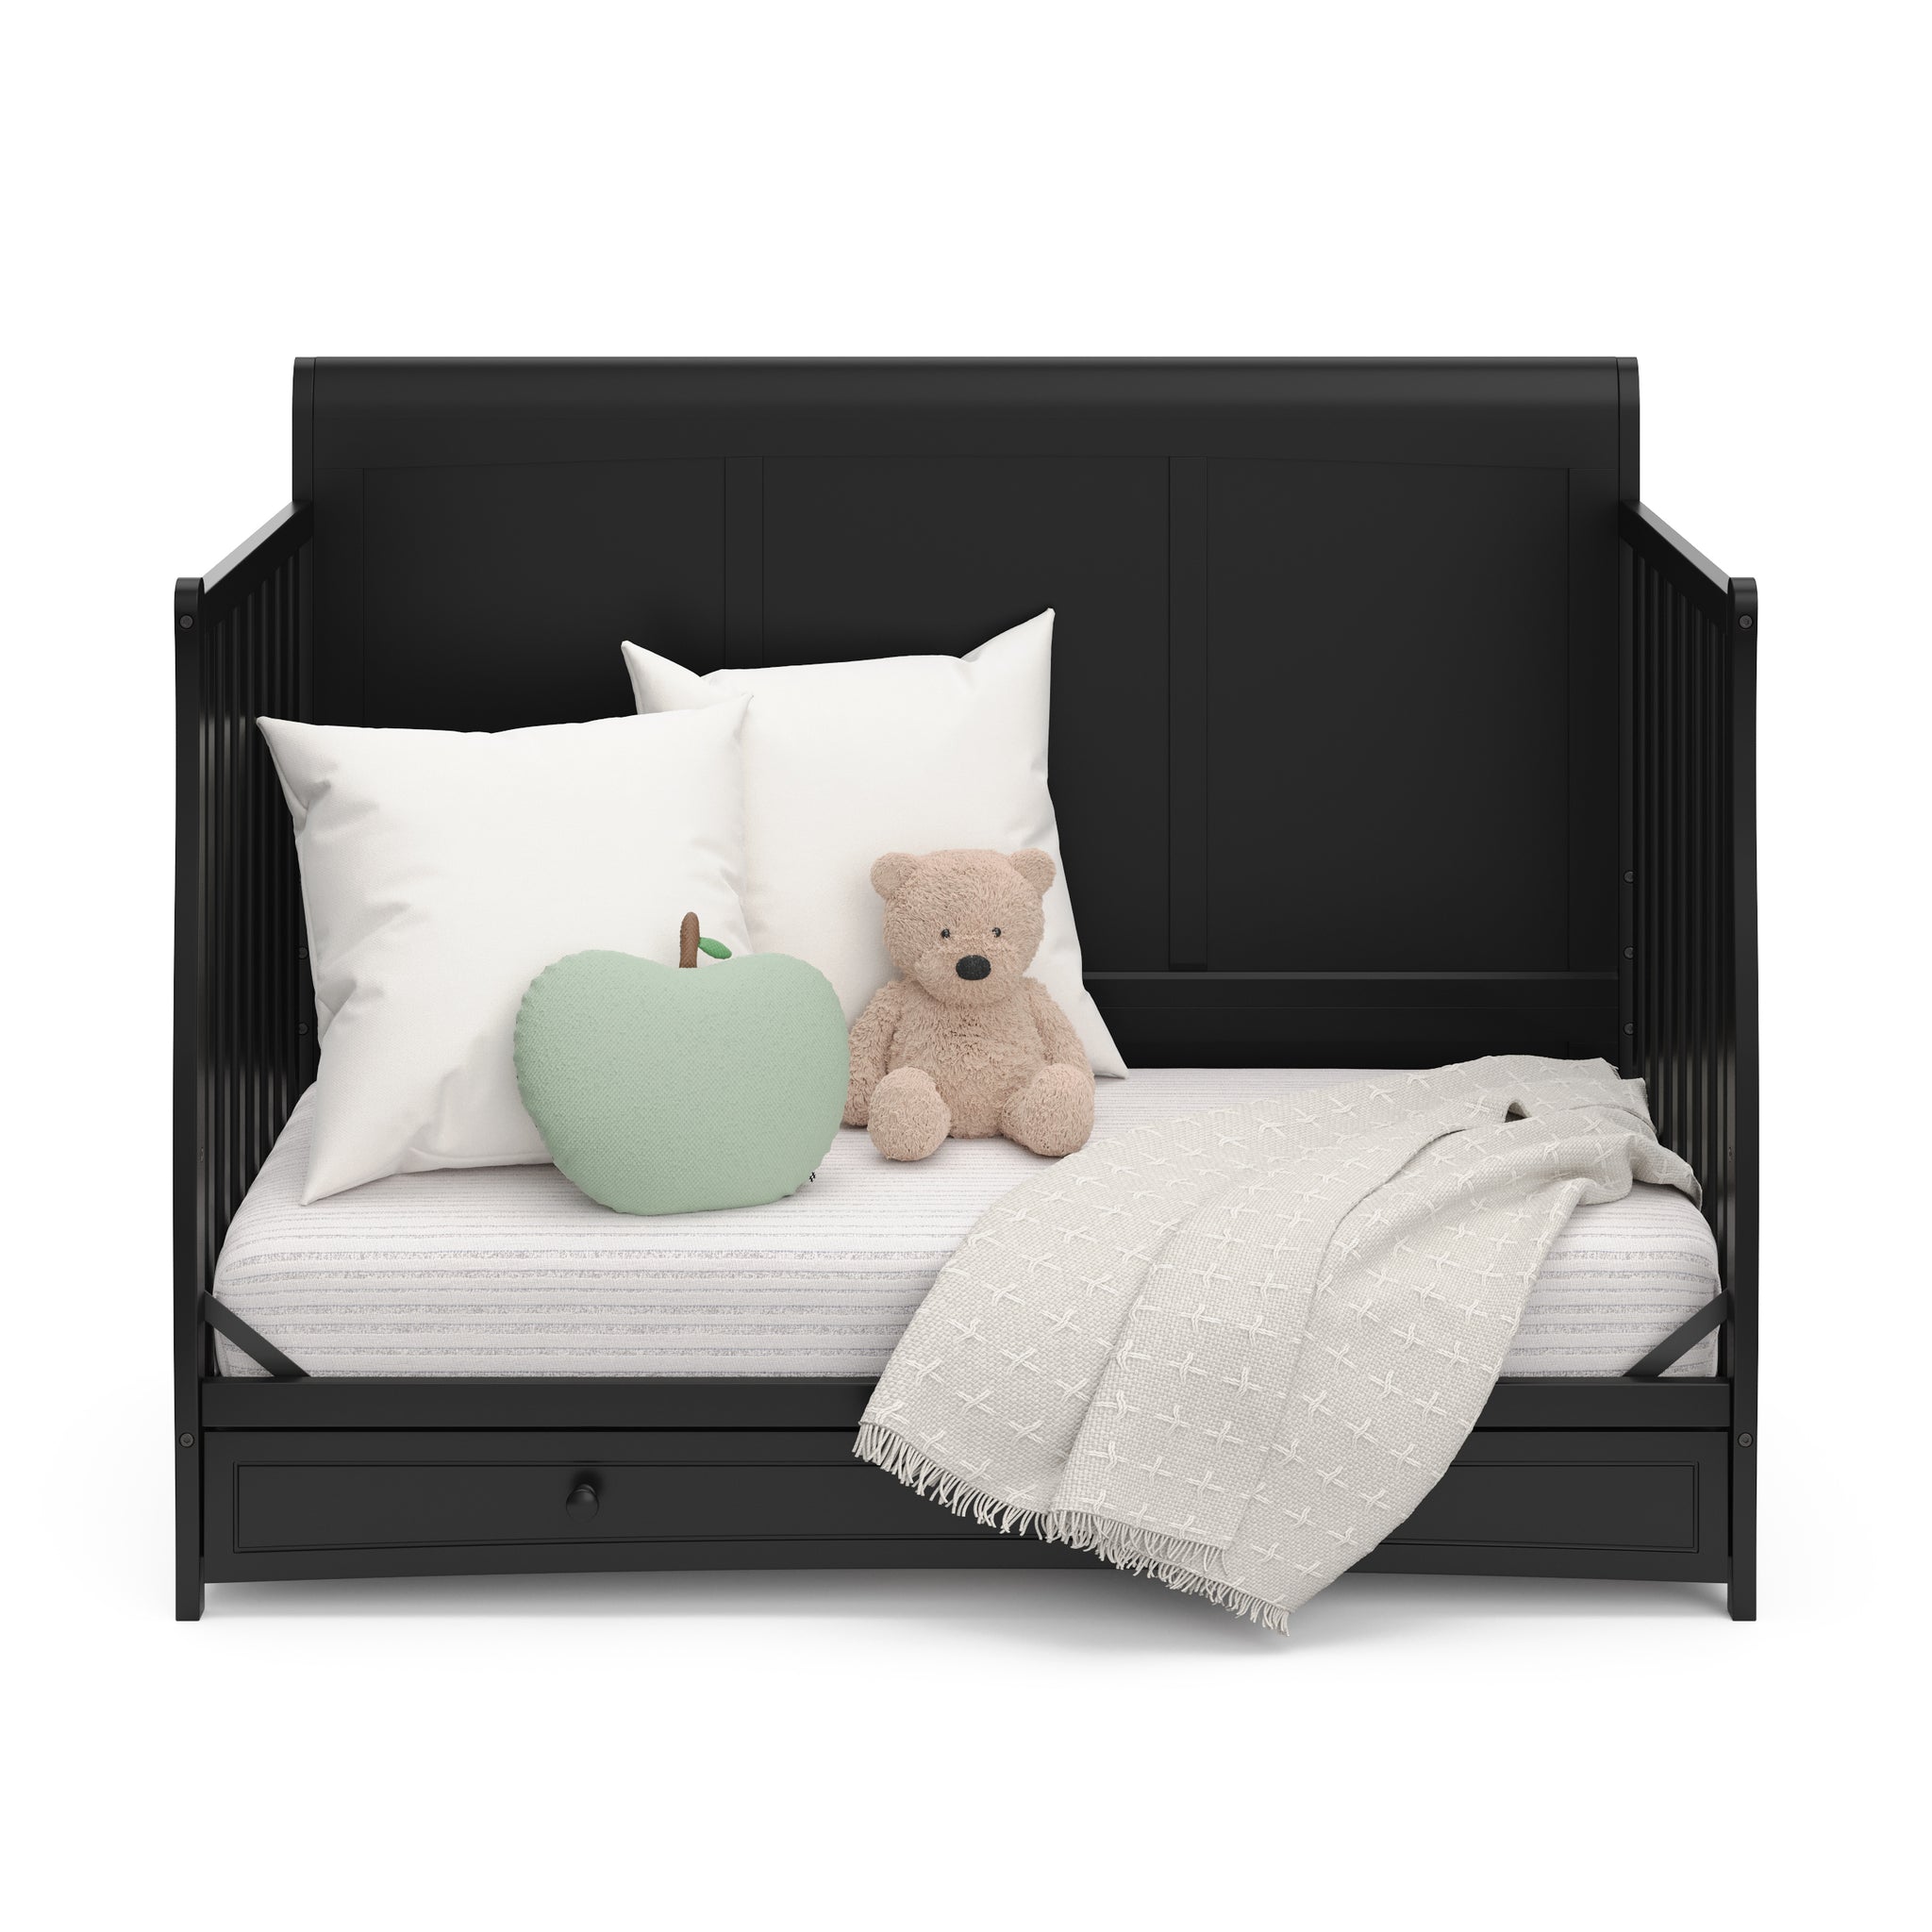 Black crib with drawer in daybed conversion